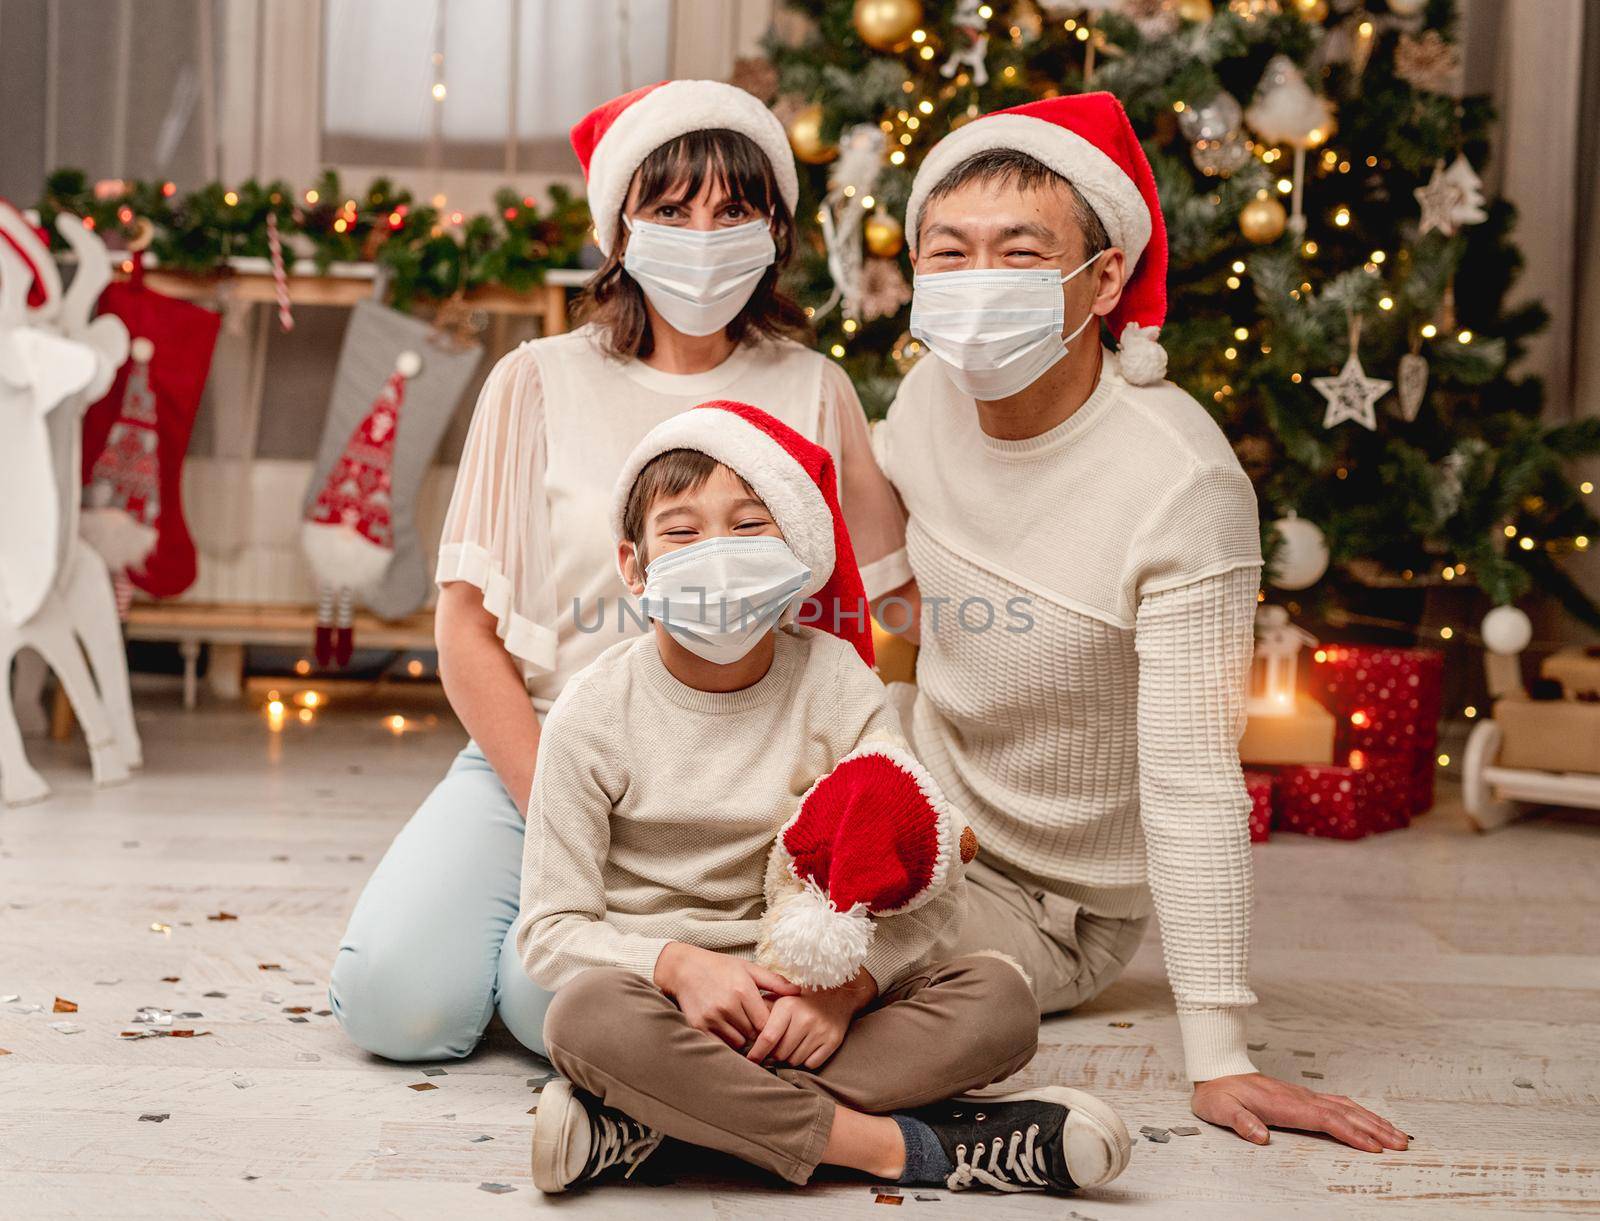 Happy family in protective masks celebrating christmas at home during coronavirus pandemic